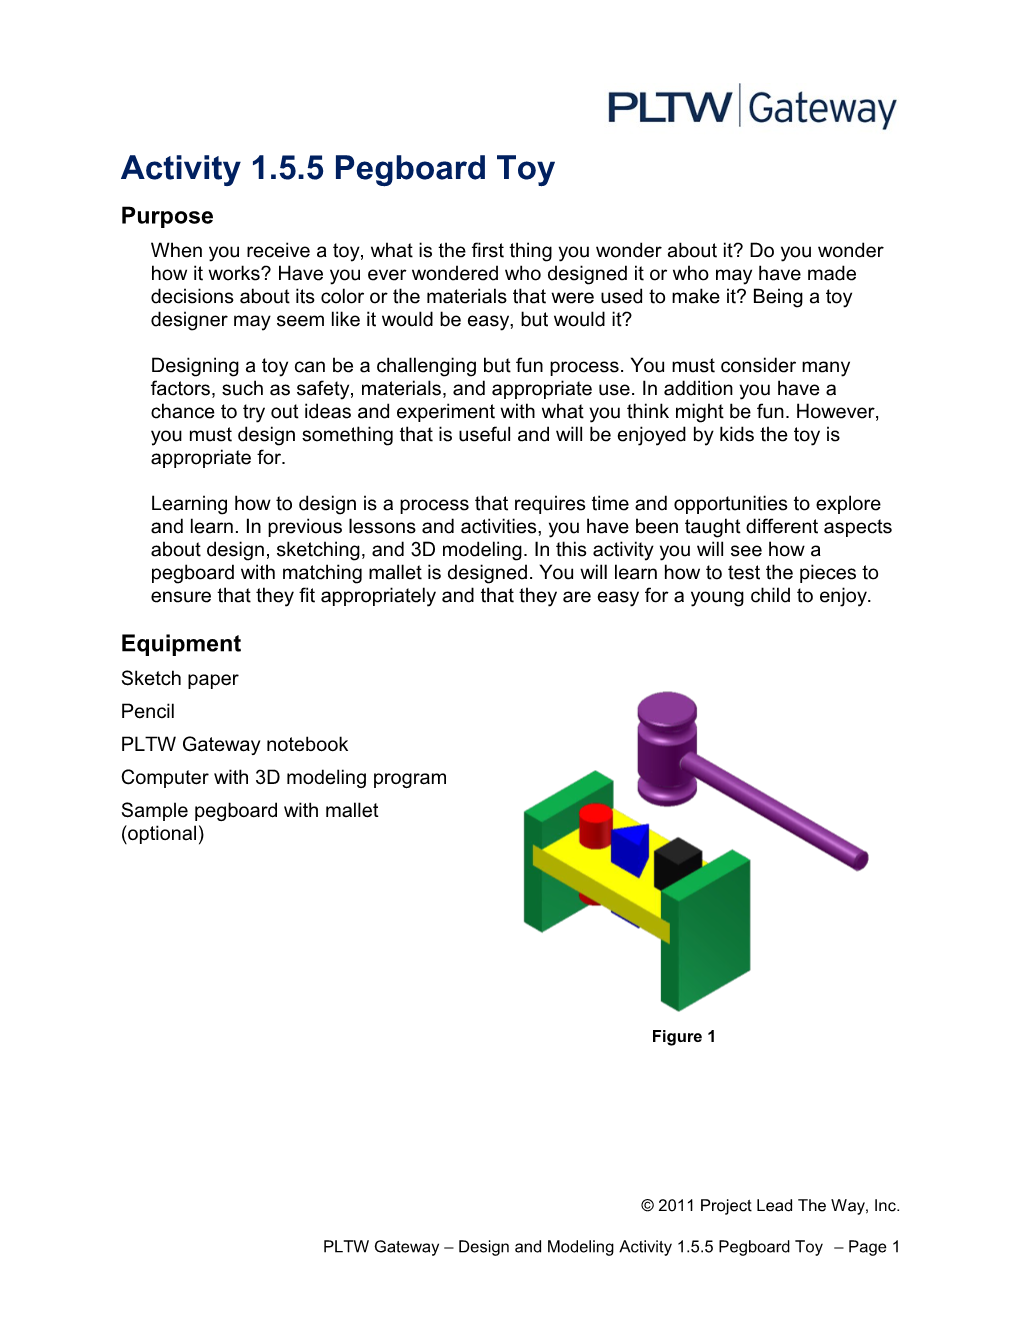 Activity 1.5.5 Pegboard Toy s1